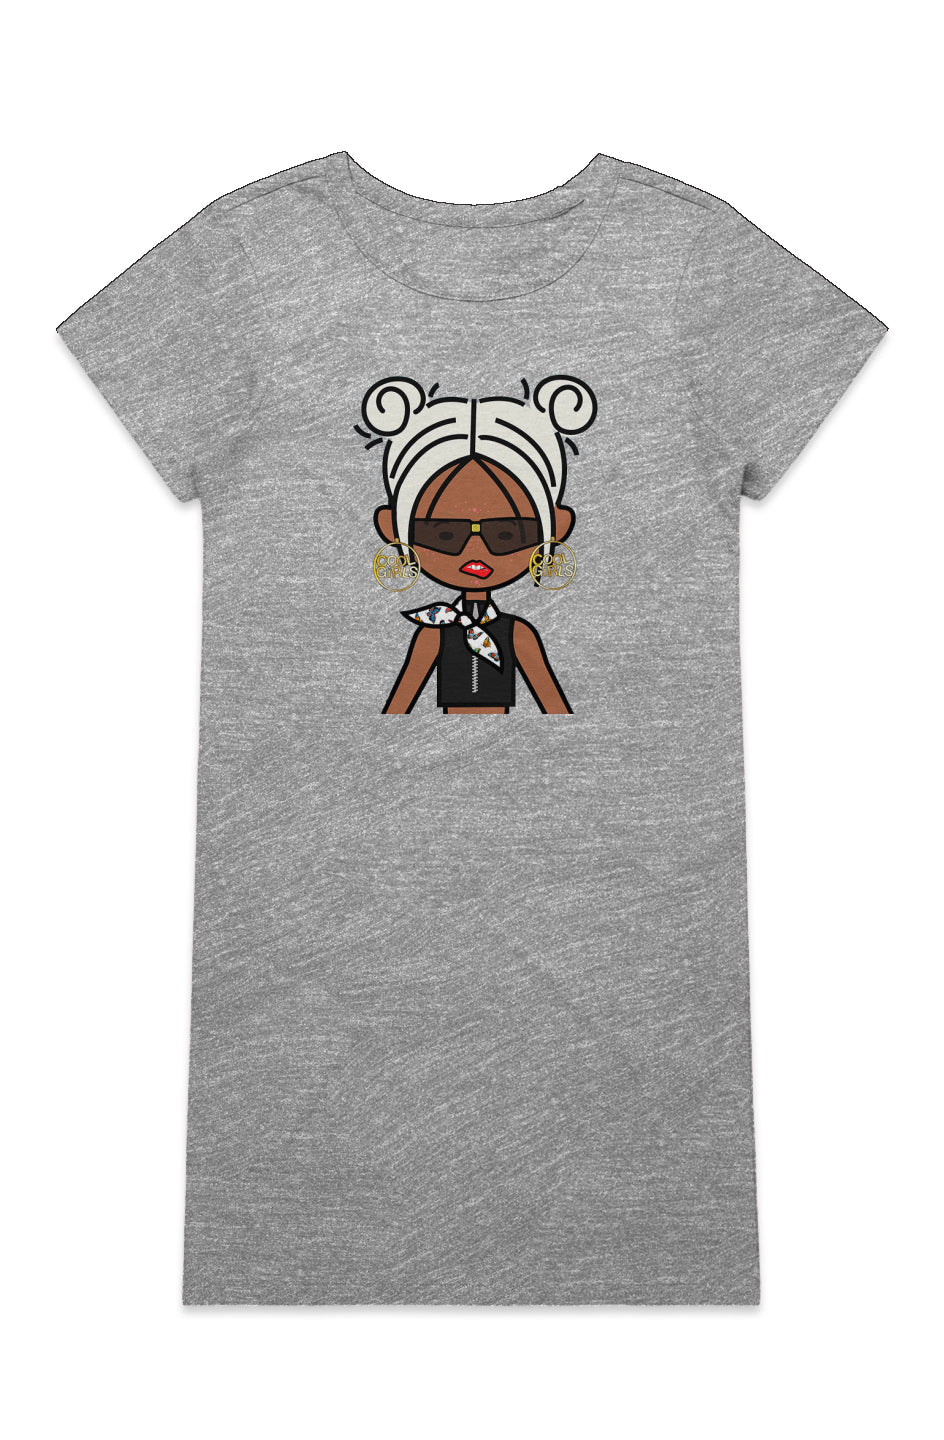 Organic Cotton T shirt dress with cute cool girl illustration